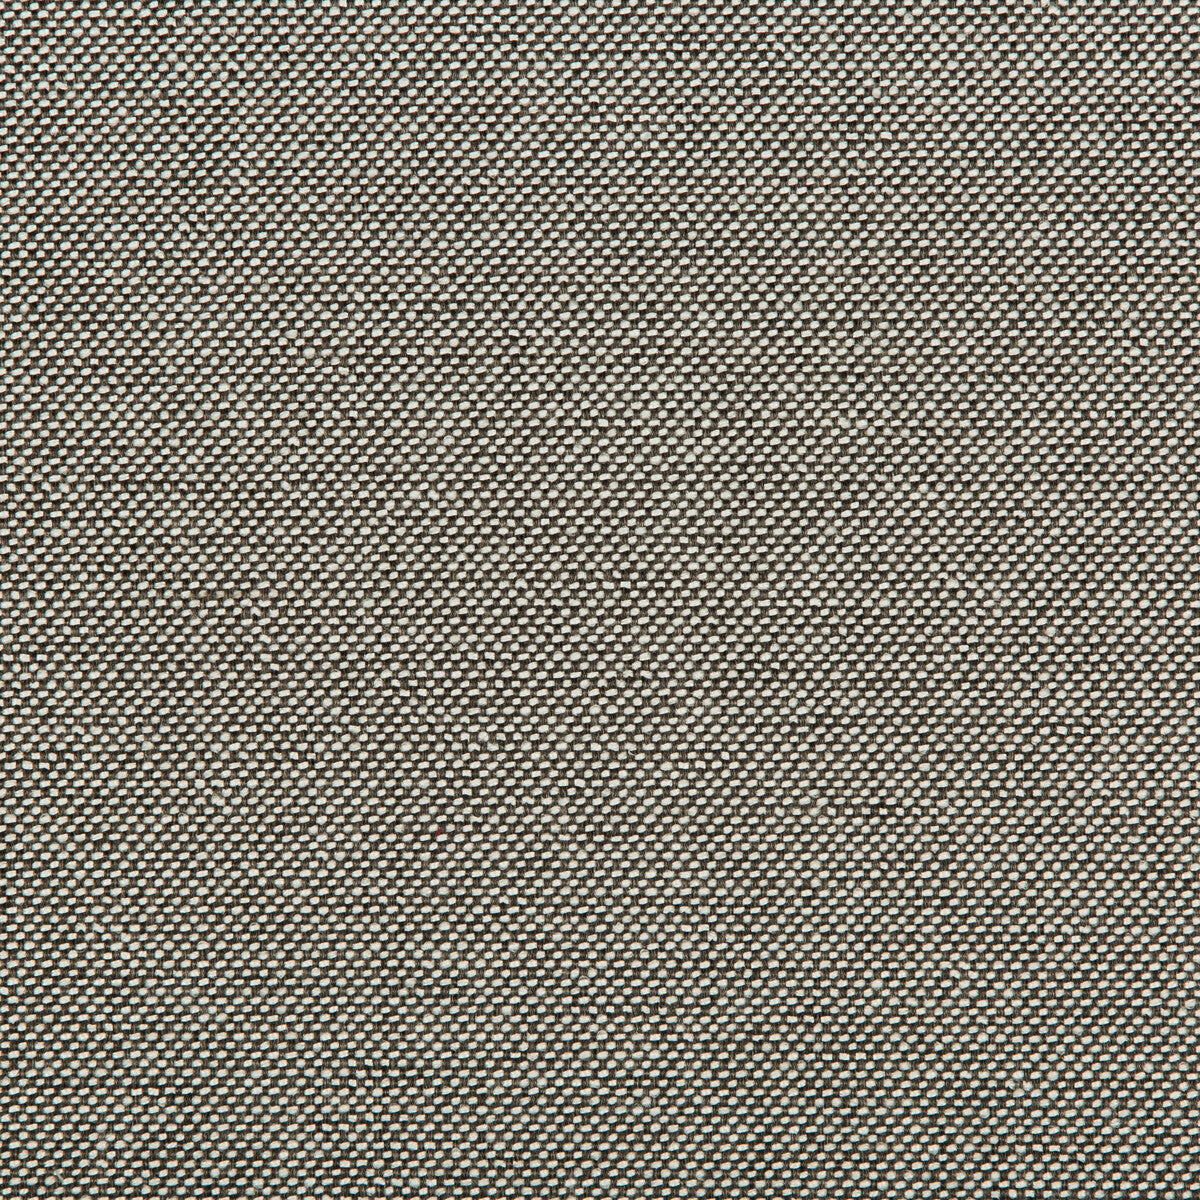 Williams fabric in aluminum color - pattern 35744.121.0 - by Kravet Contract in the Value Kravetarmor collection